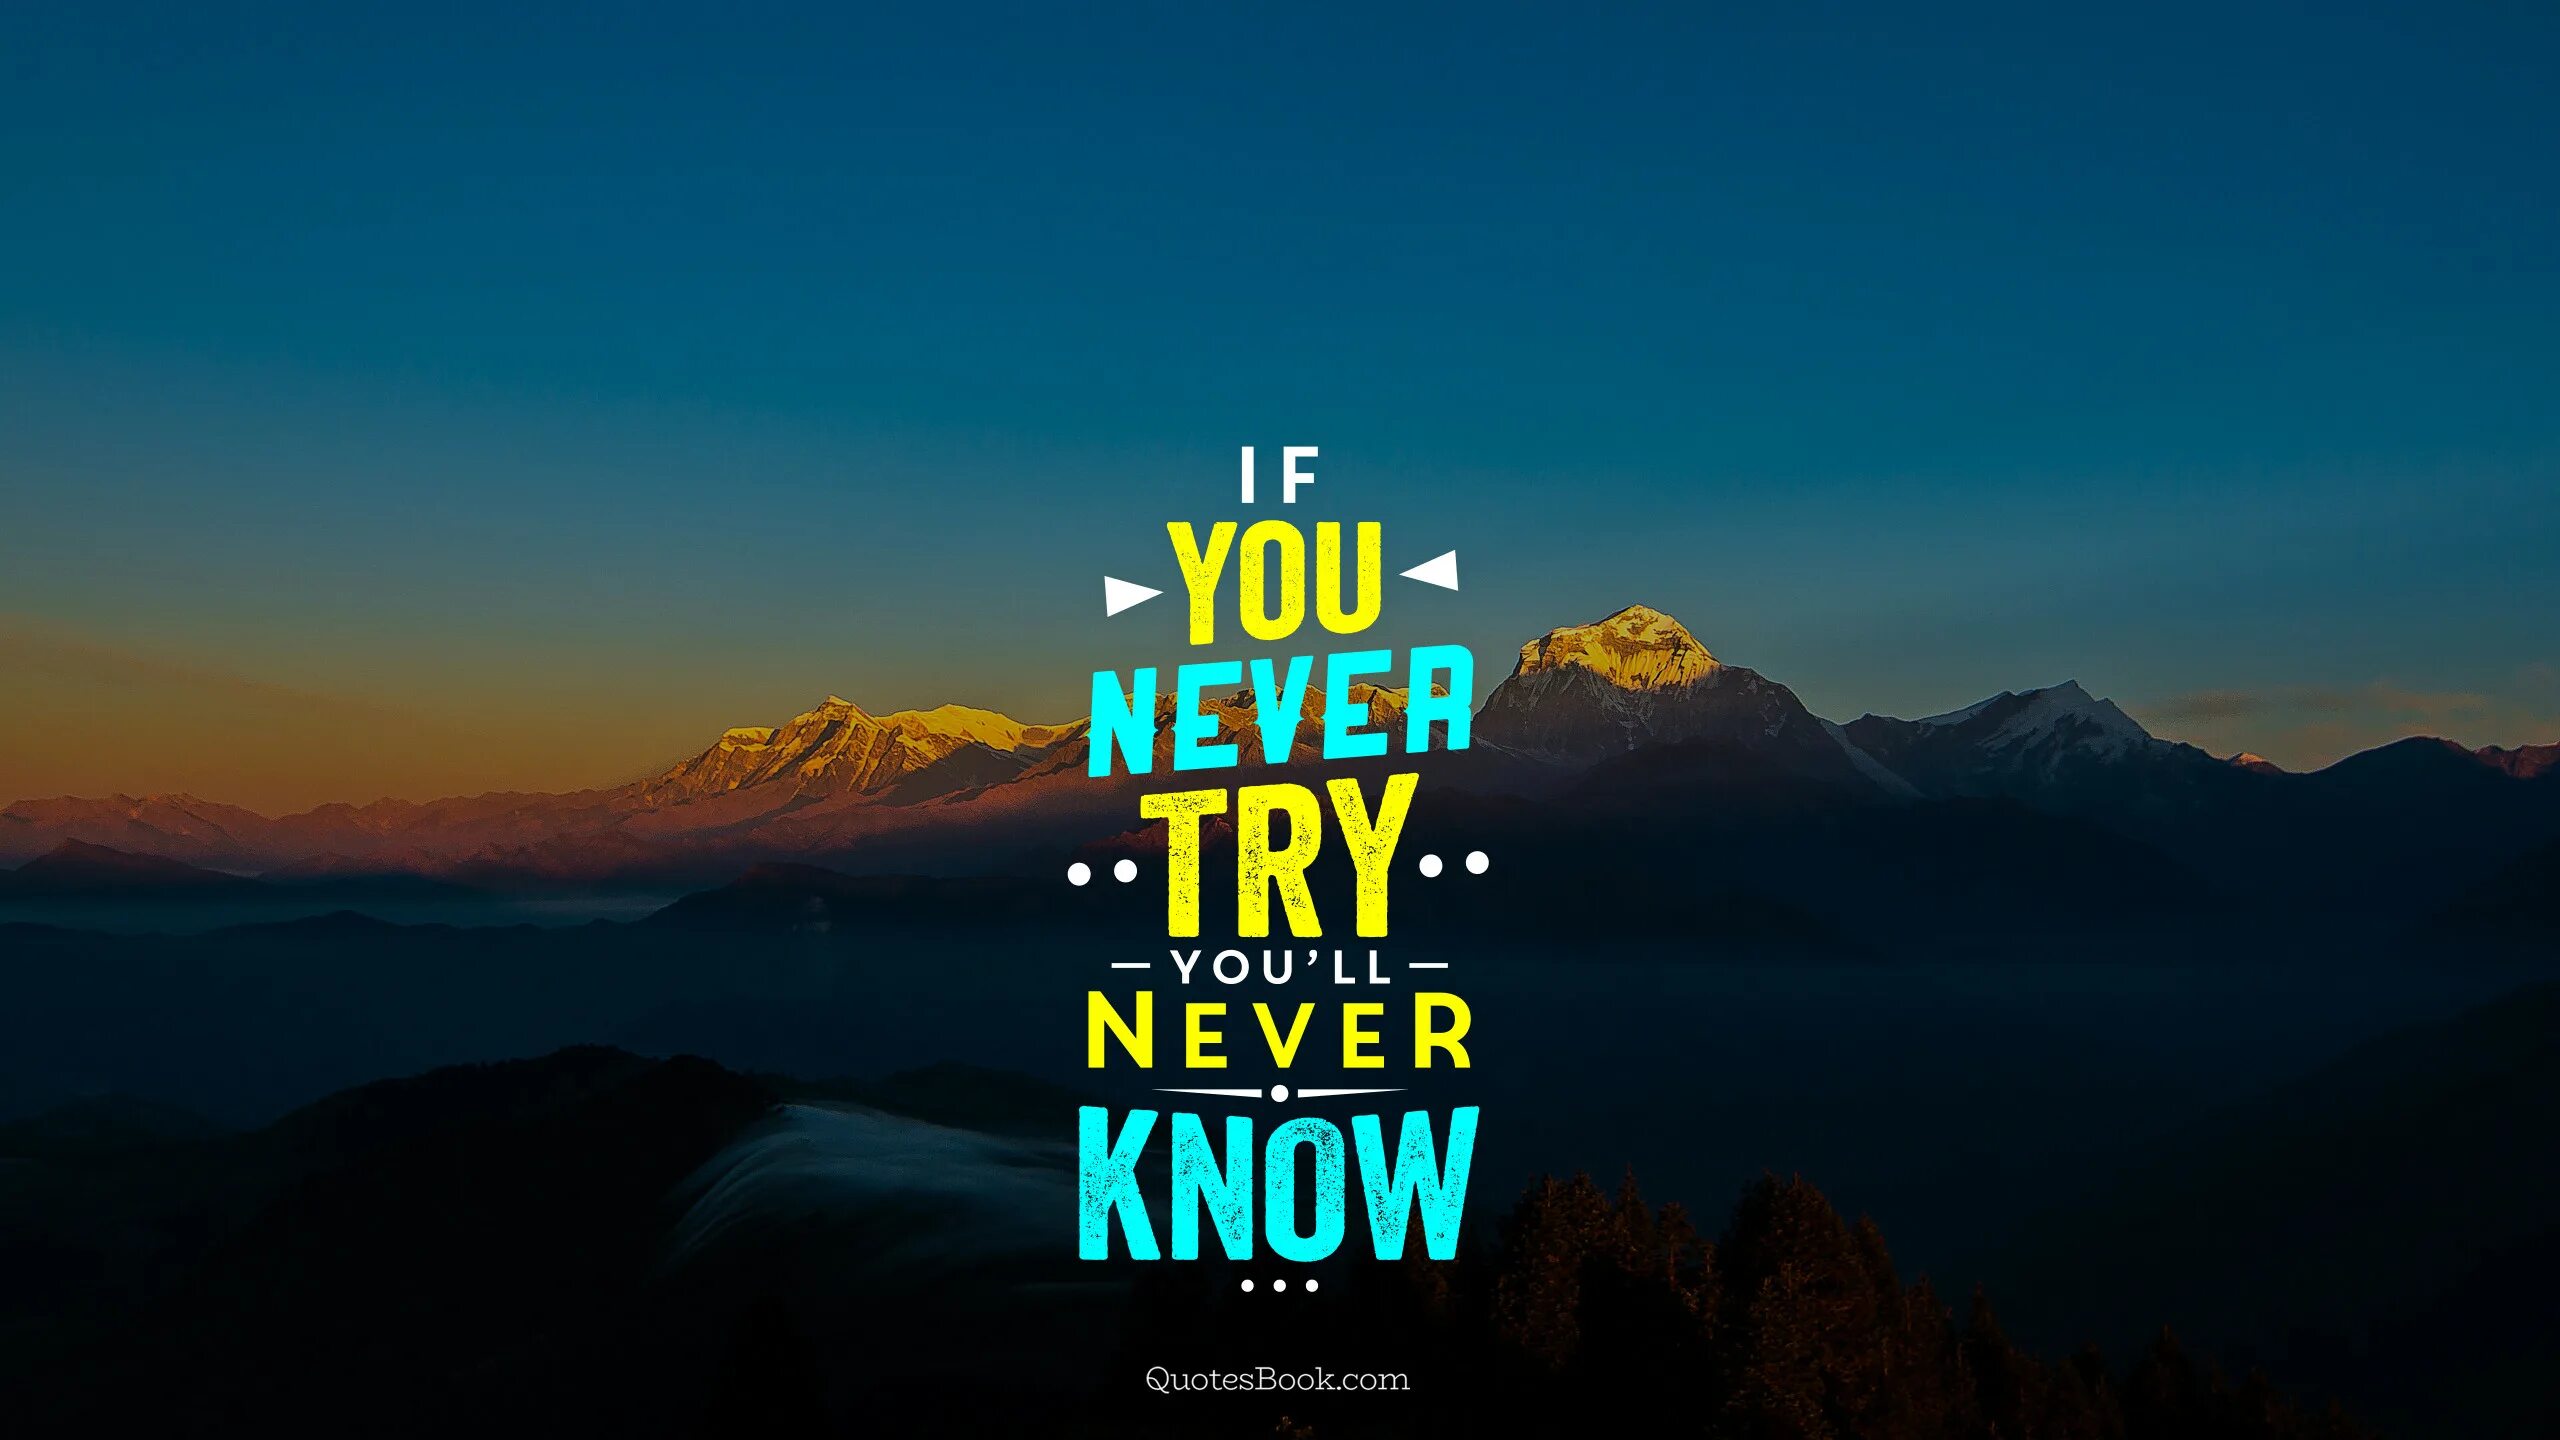 You will never know текст. If you never try you'll never know. Обои if you never try you'll never know. You never try you never know. If you never try you'll never know перевод.